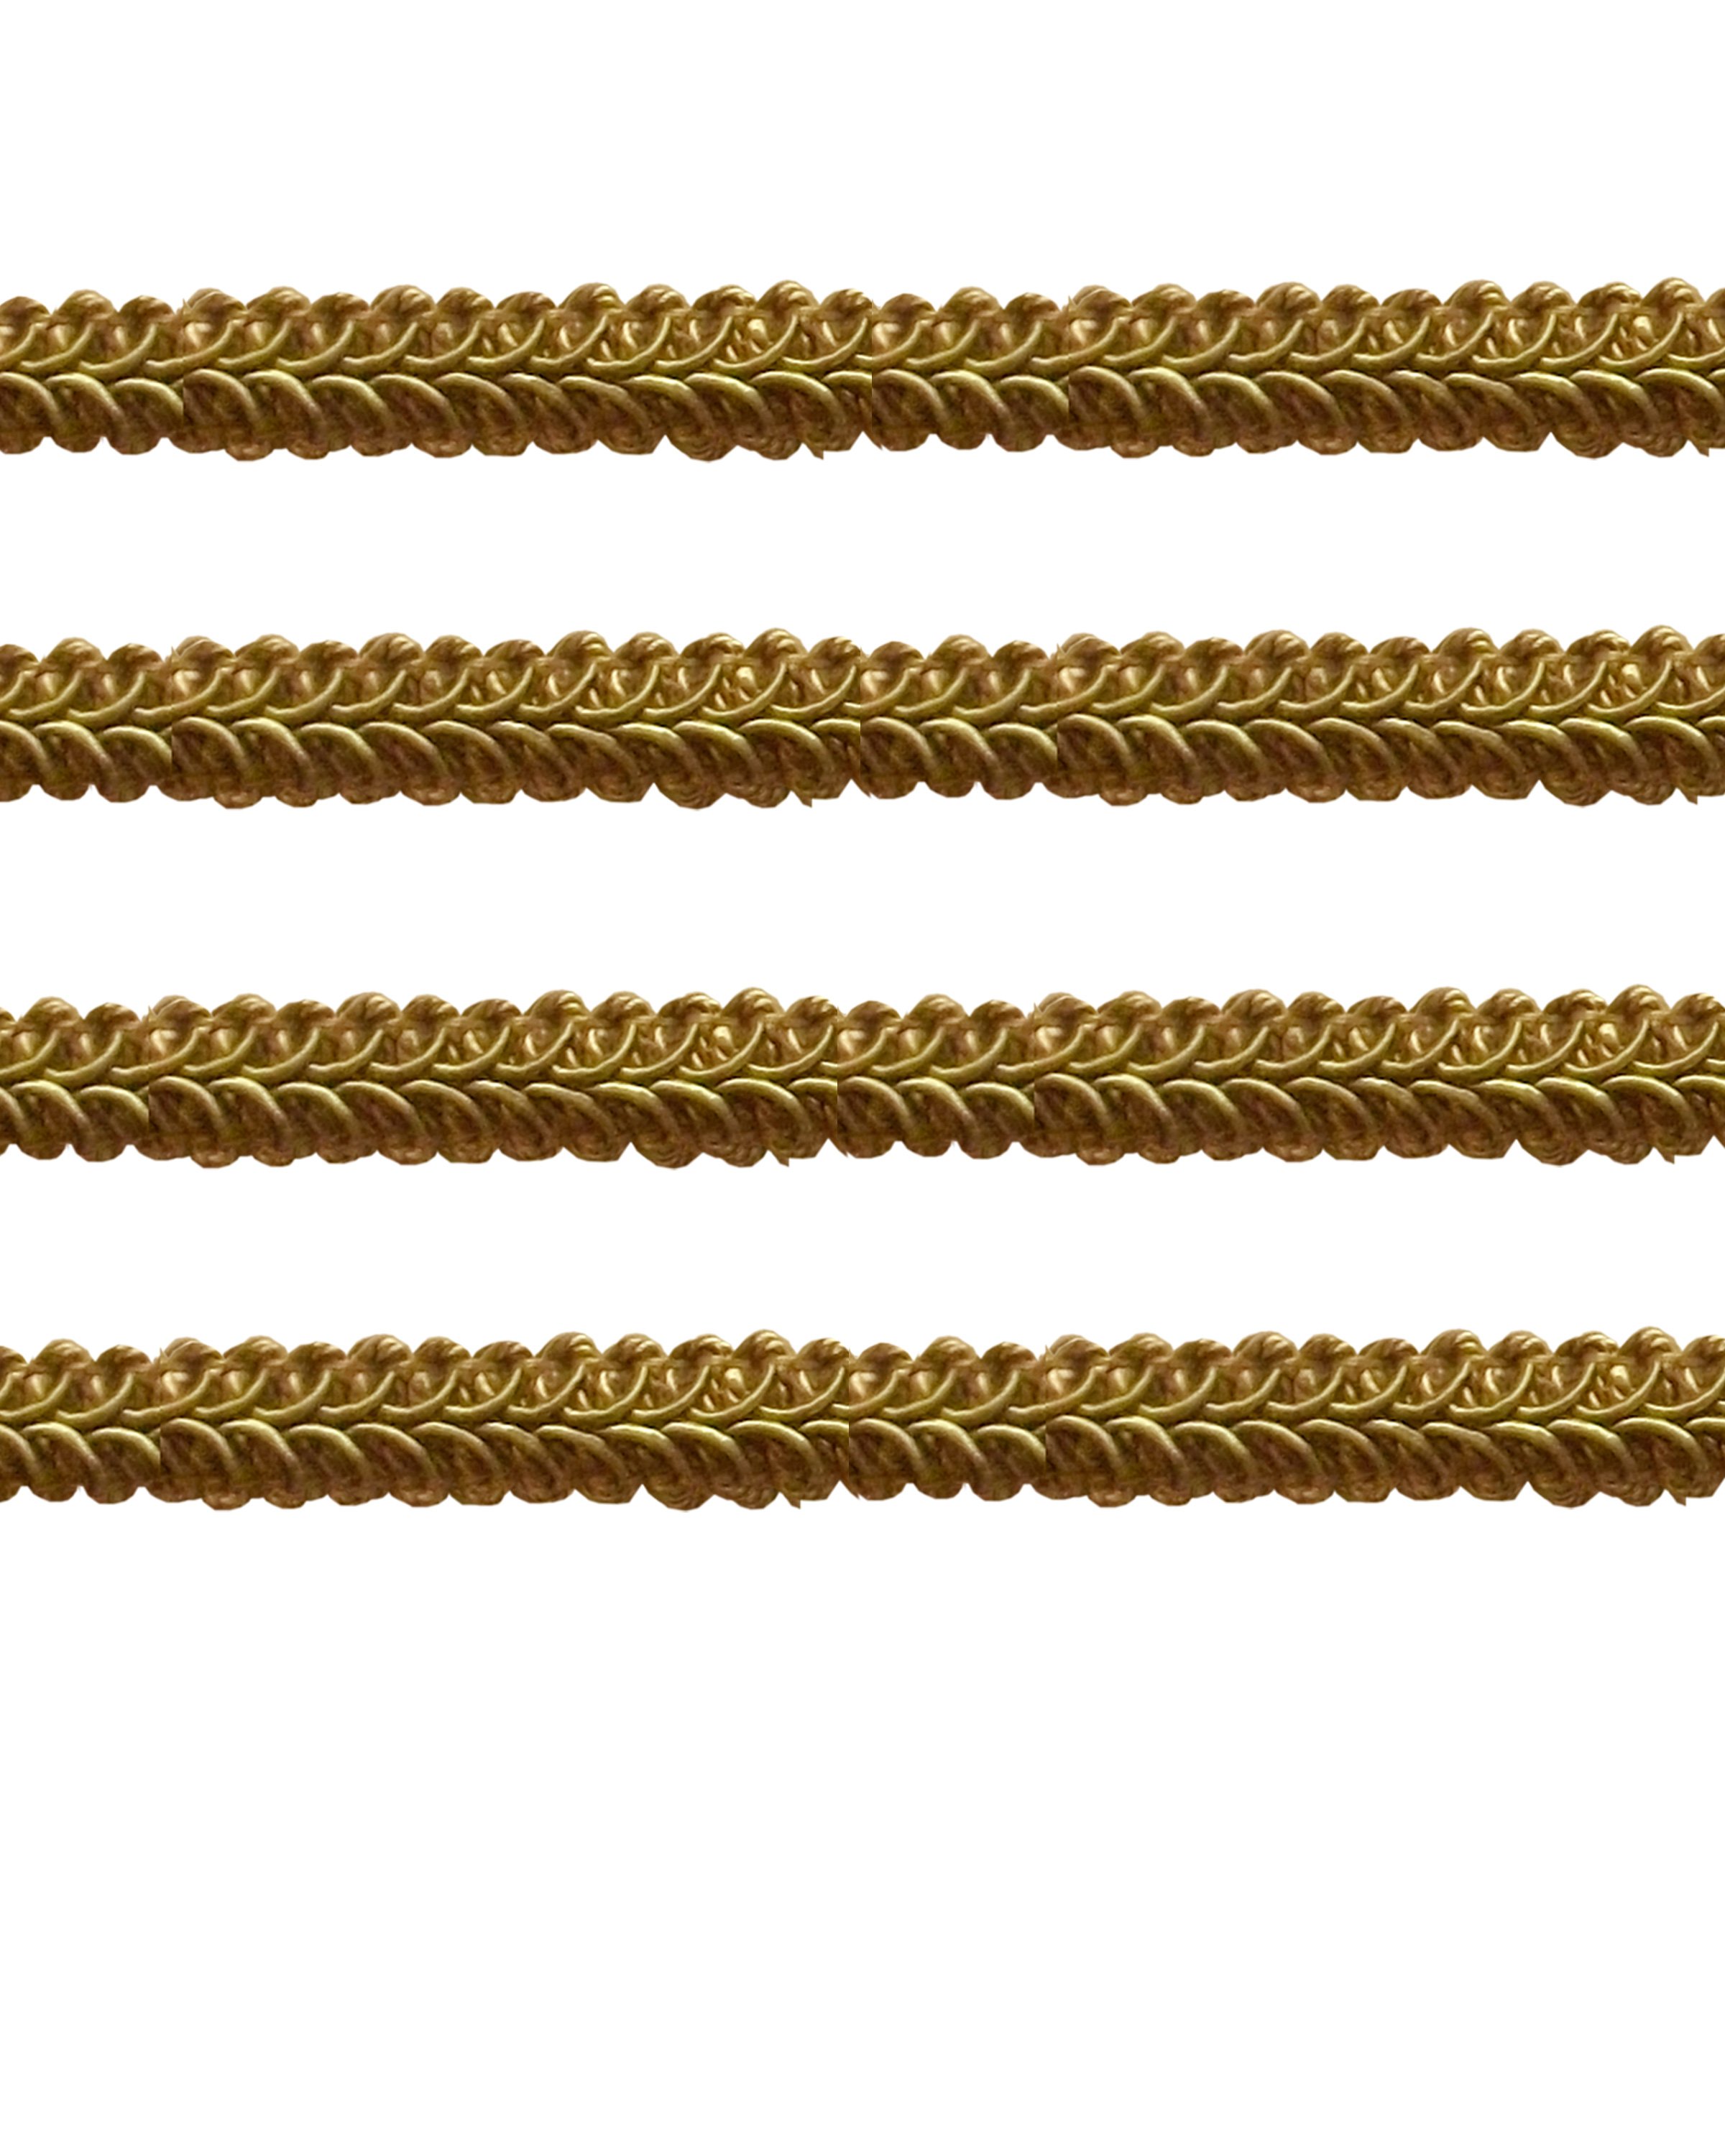 Small Herringbone Braid - Gold 12mm Price is for 5 metres